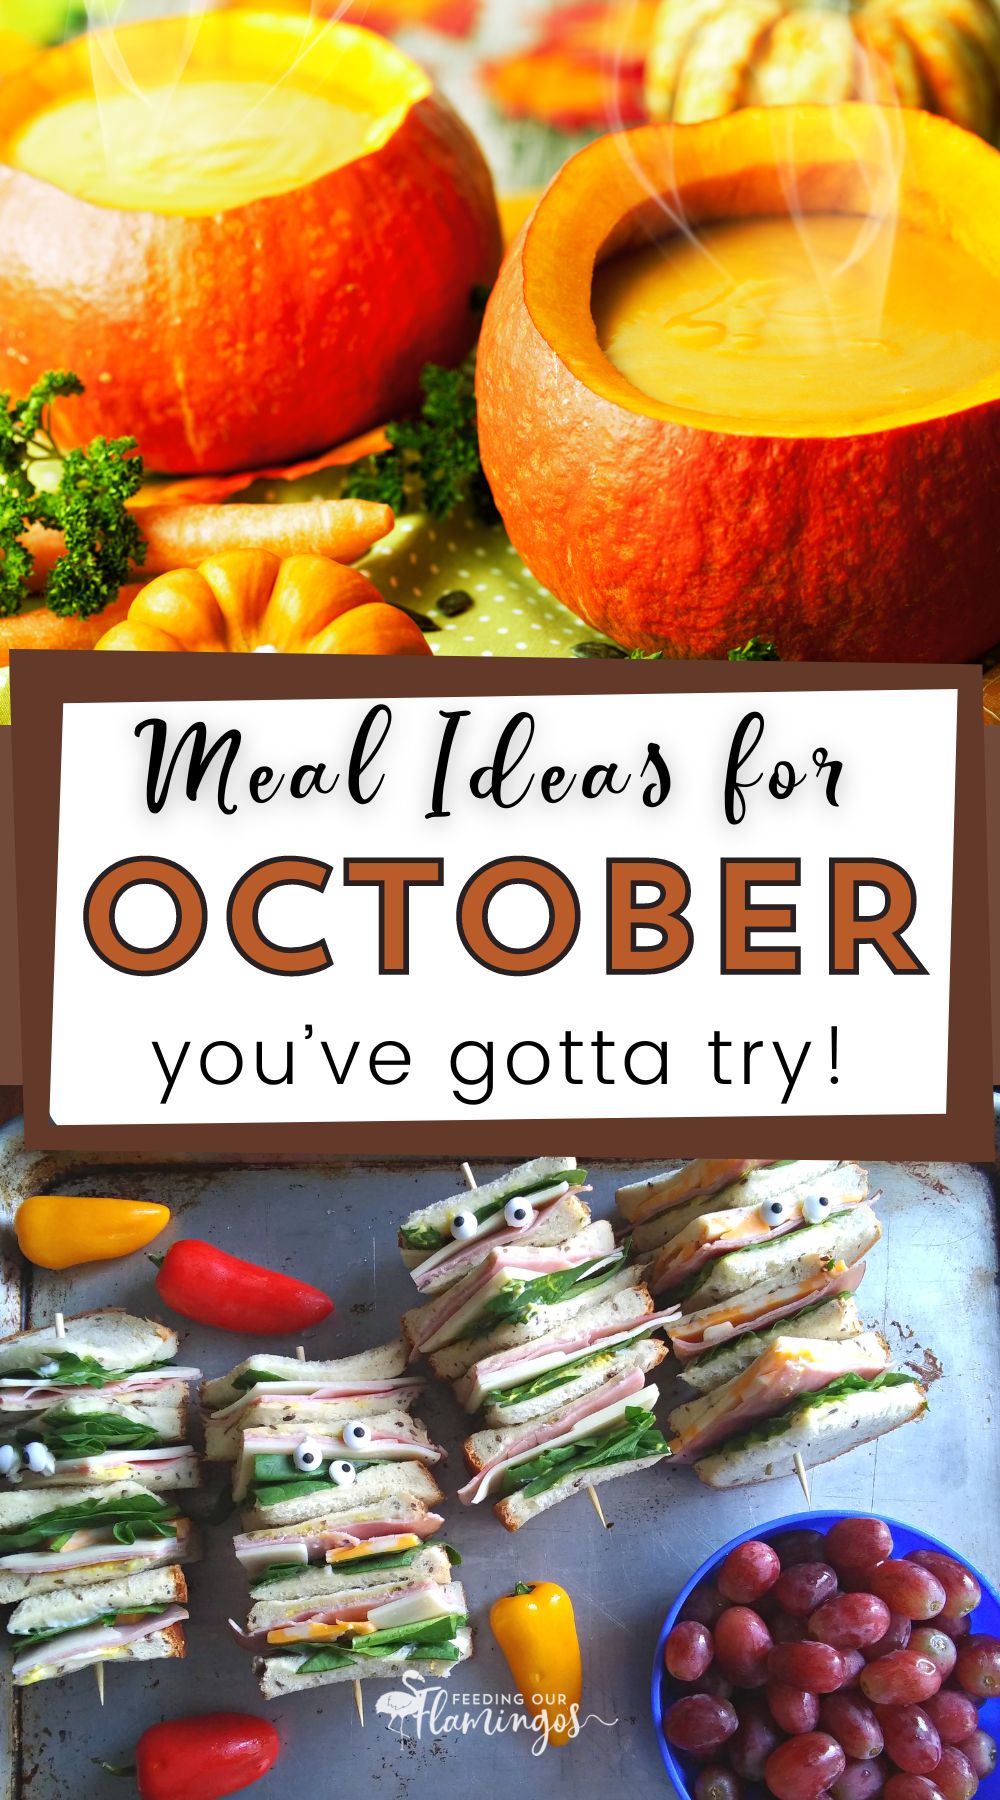 Keep your own list of favorite/must-try meals for every month of the year. October has some fun fall and Halloween meal ideas to try!